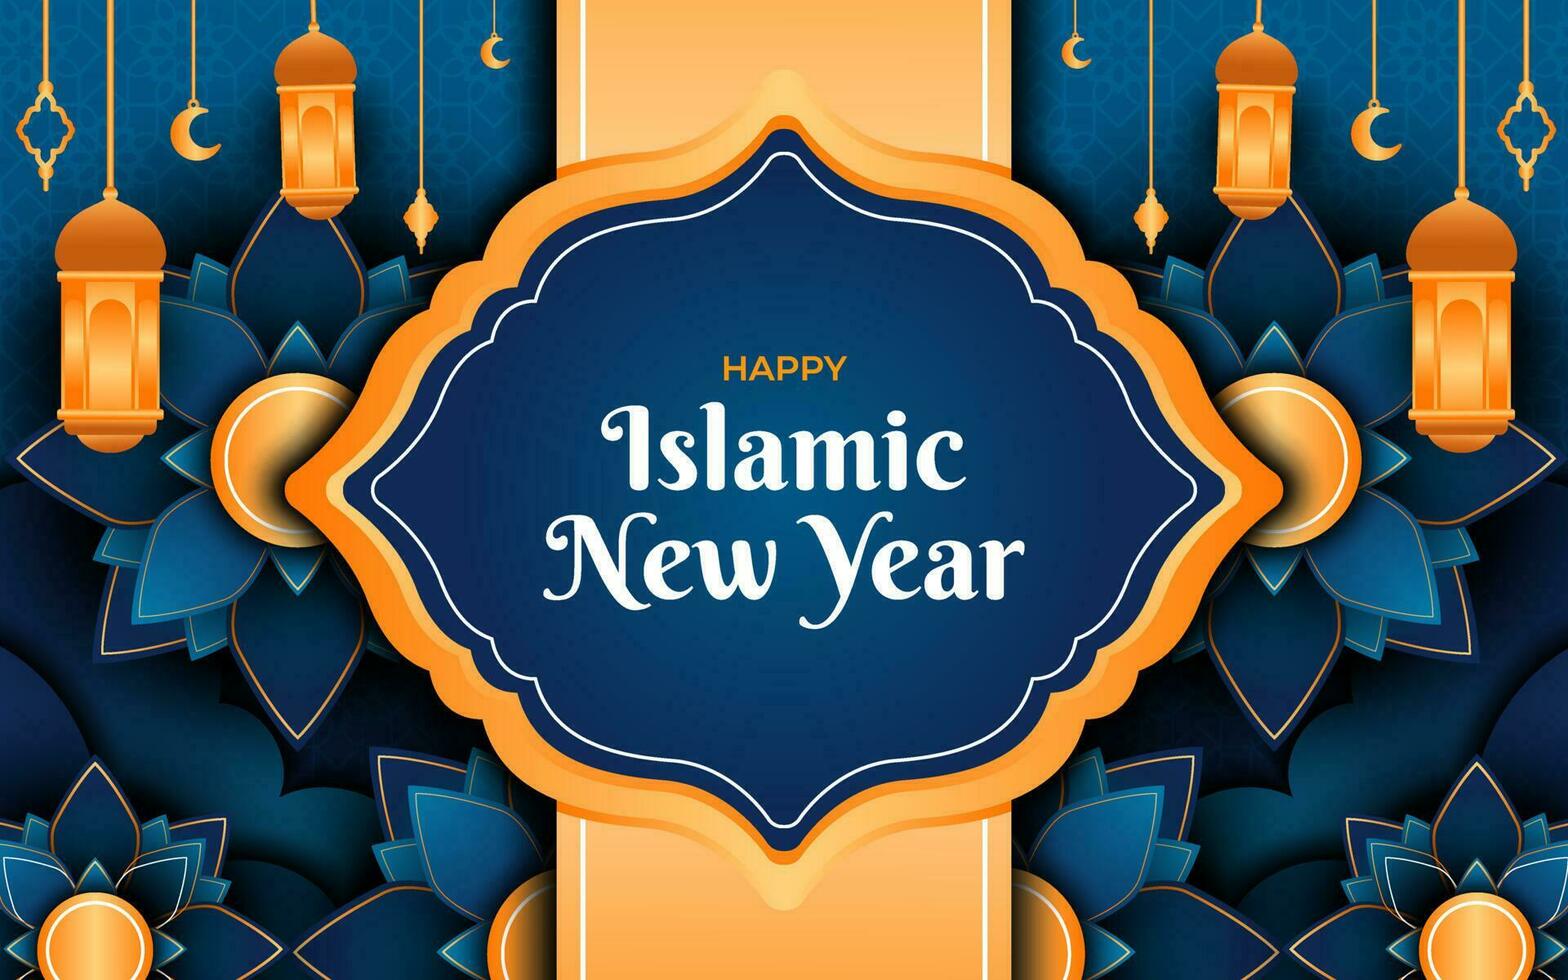 Islamic New Year Background vector